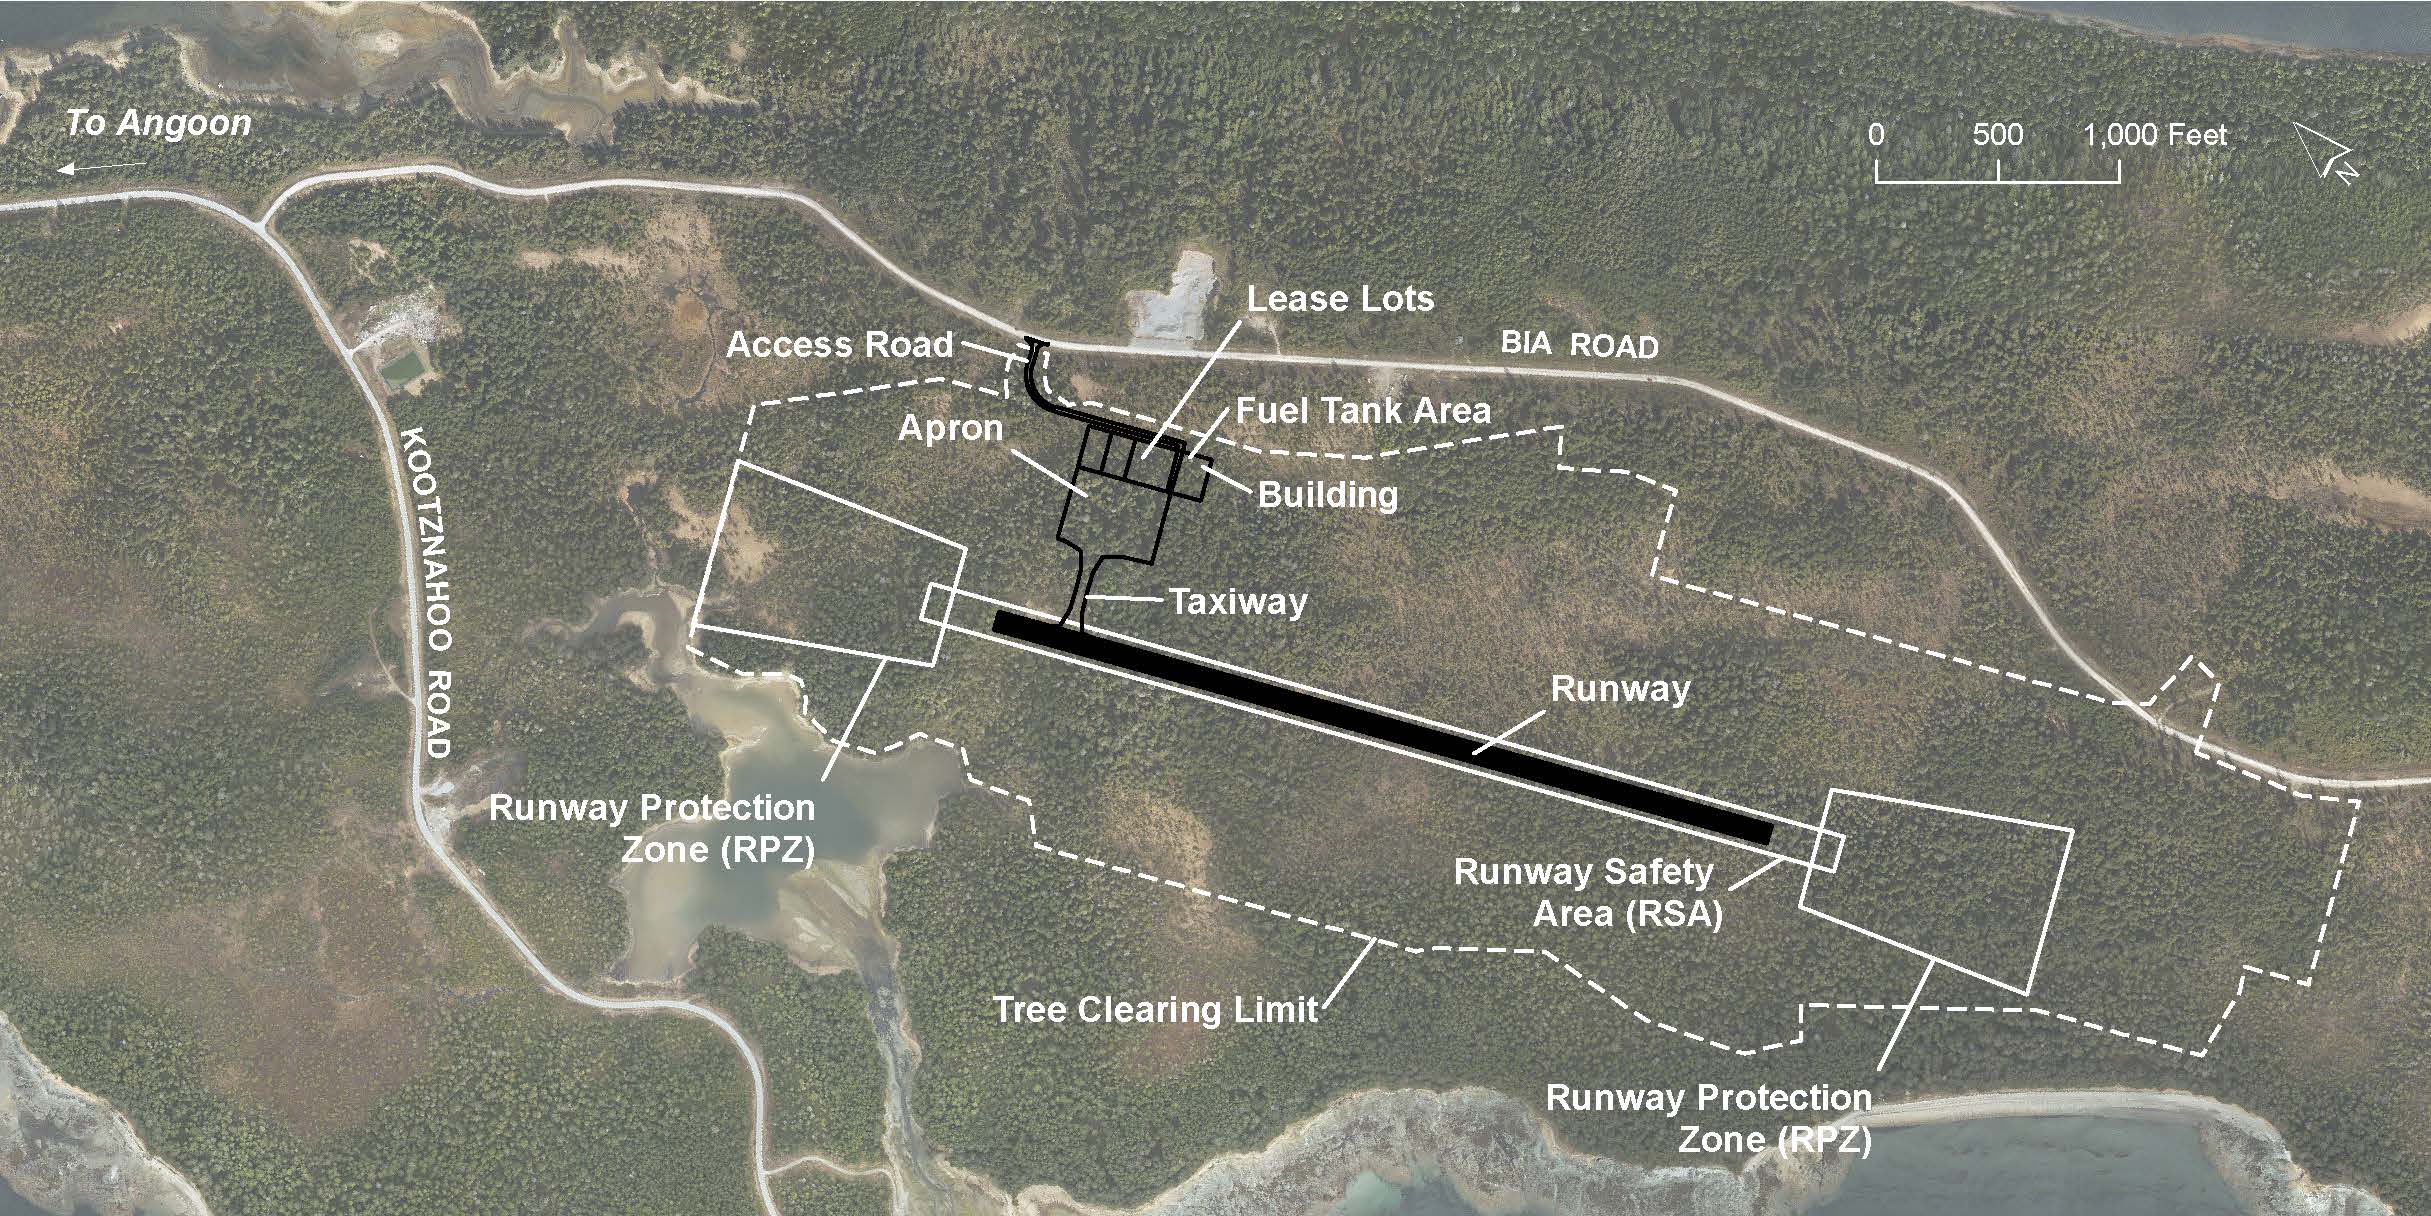 Overview of Project Area